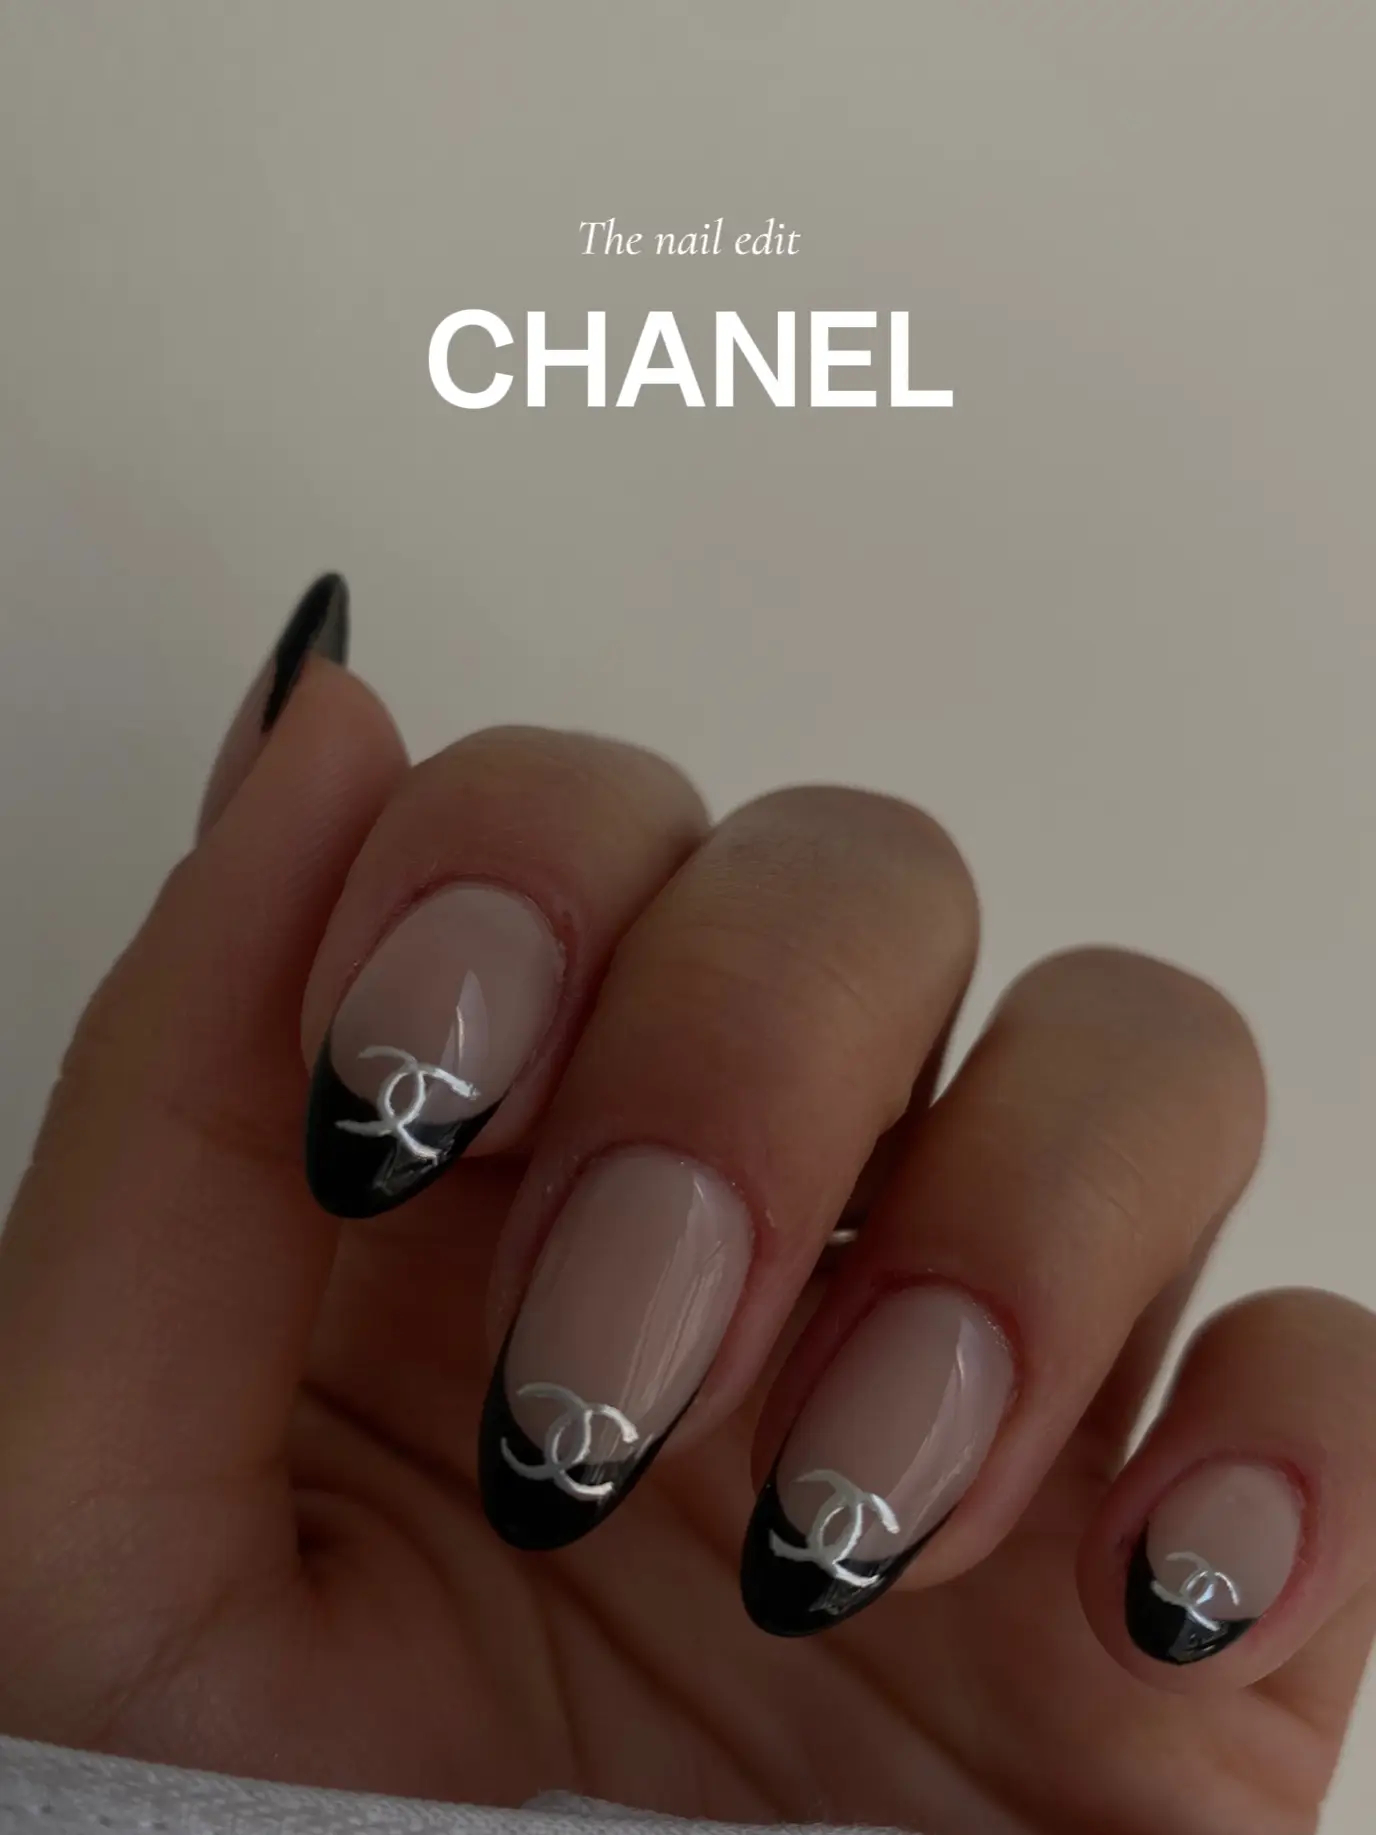 Chanel nails 🖤, Gallery posted by Faith Pang